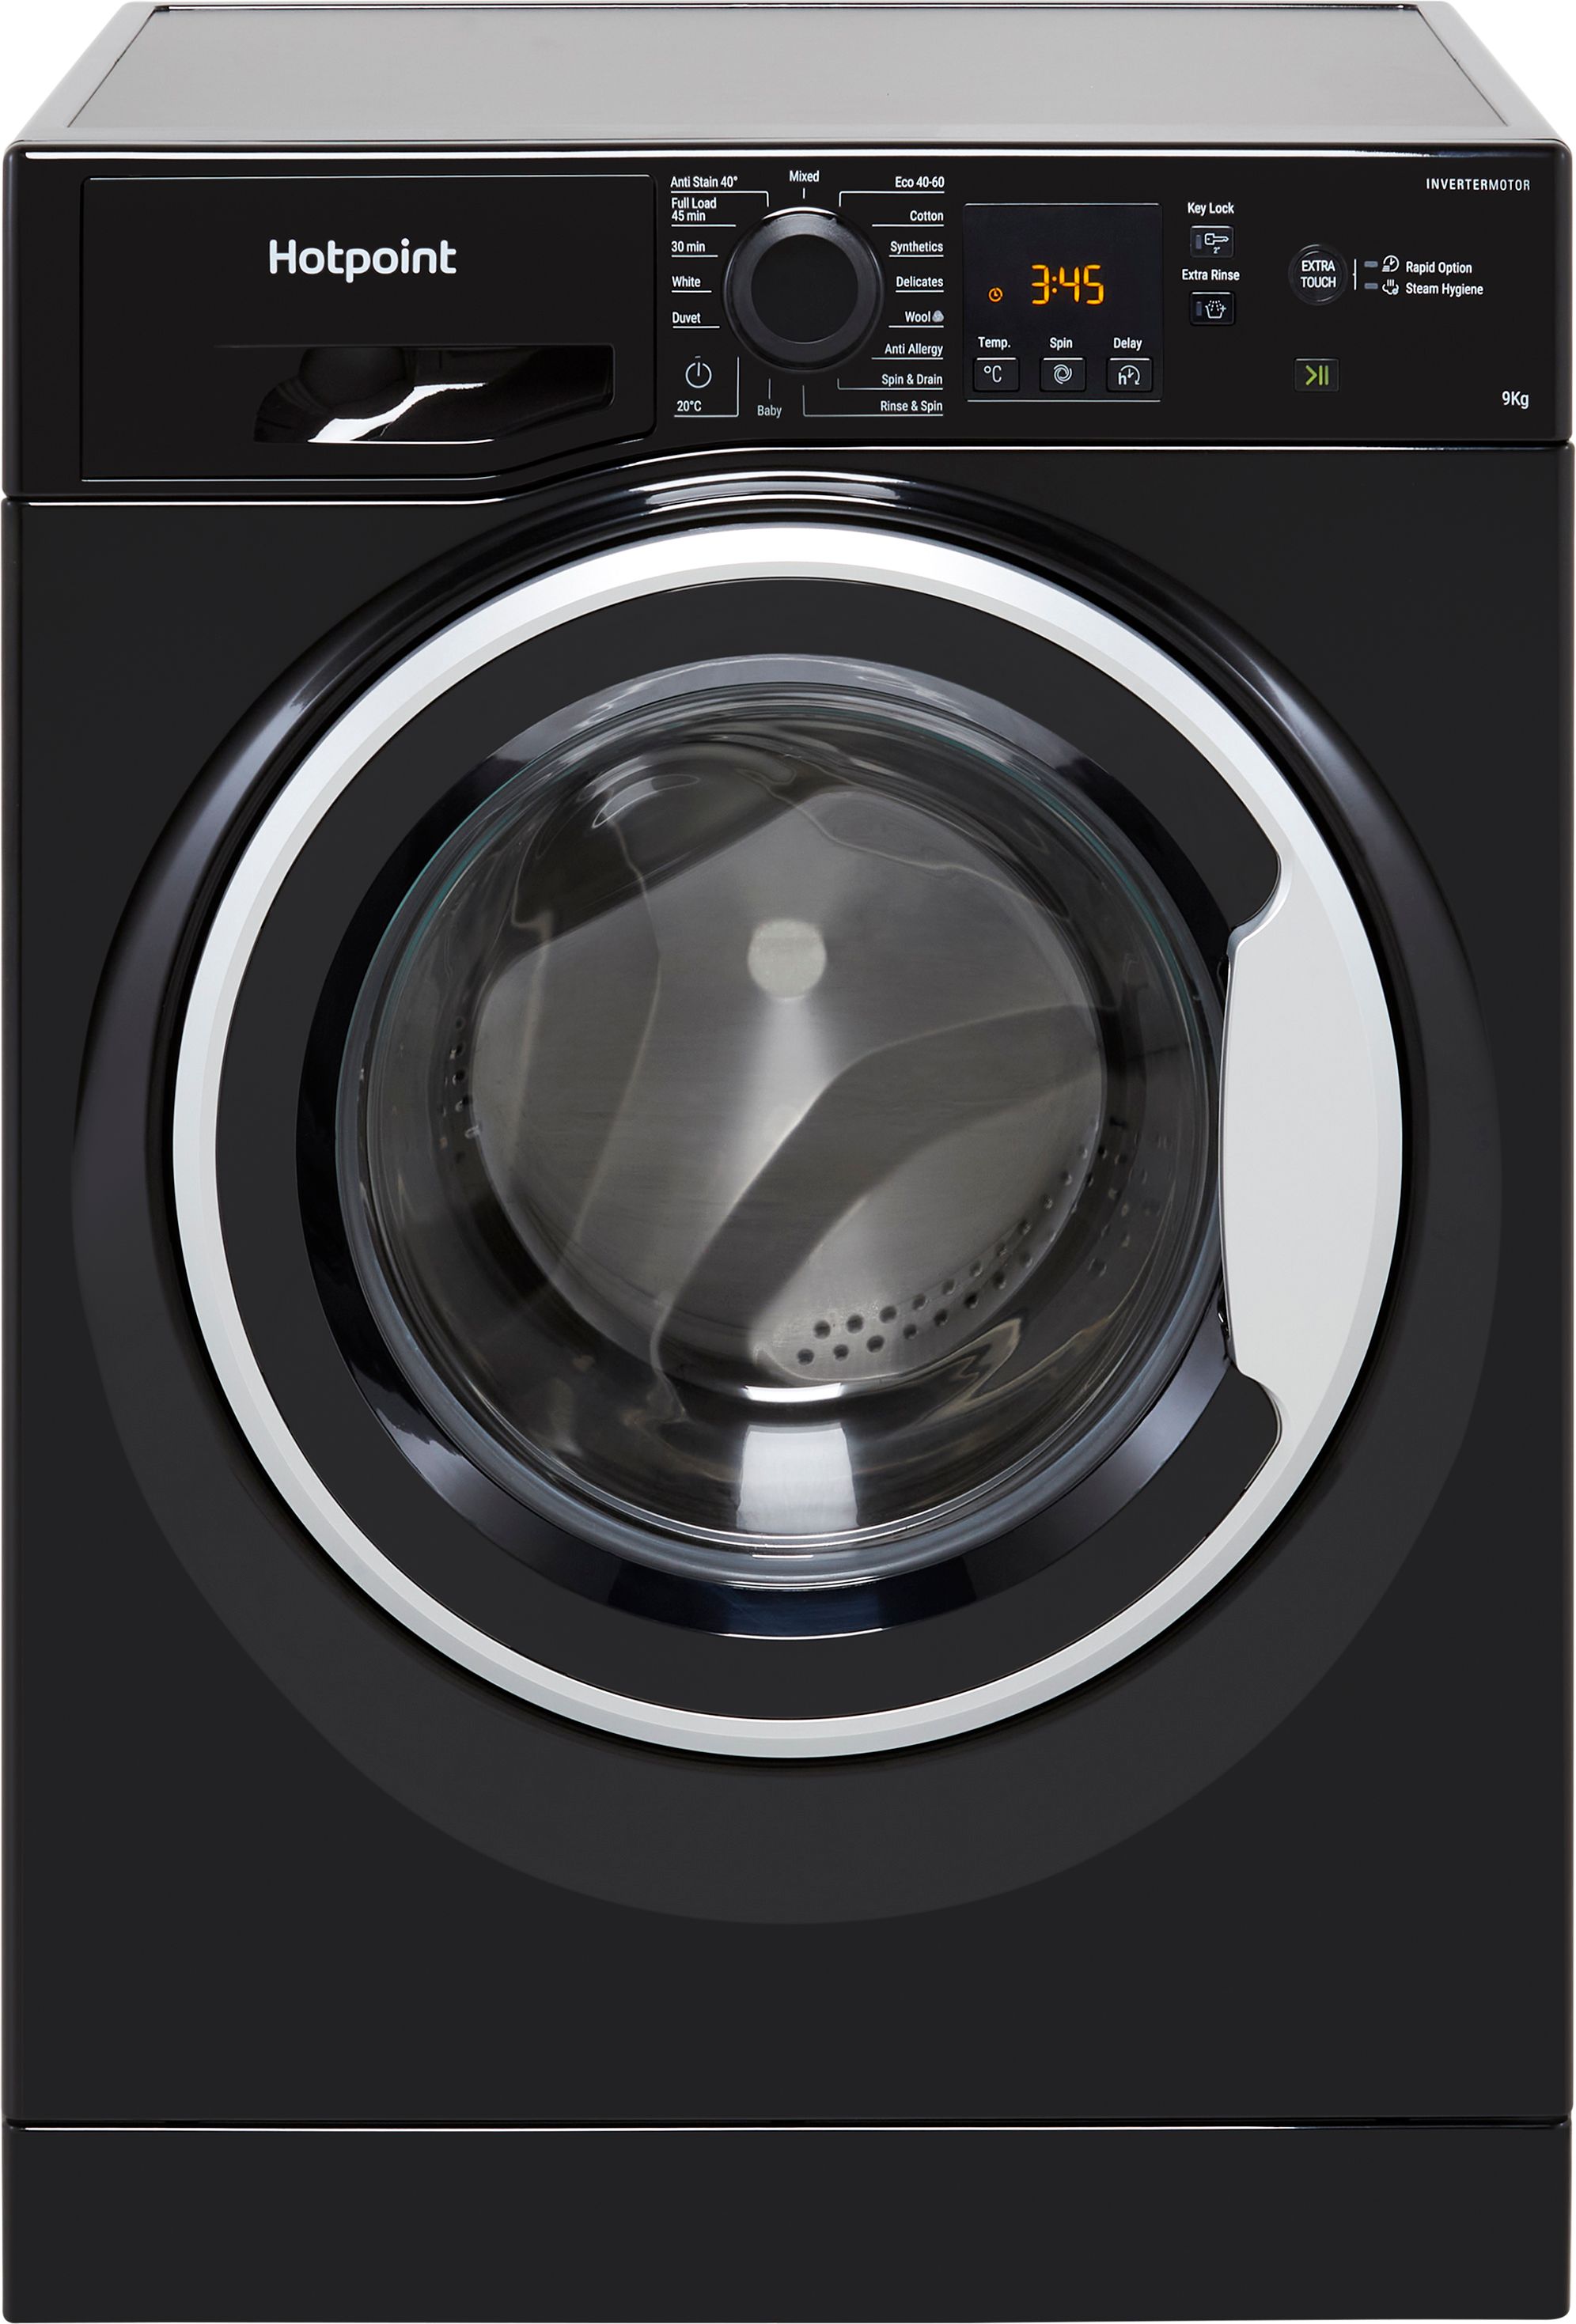 Hotpoint NSWM965CBSUKN 9kg Washing Machine with 1600 rpm - Black - B Rated, Black